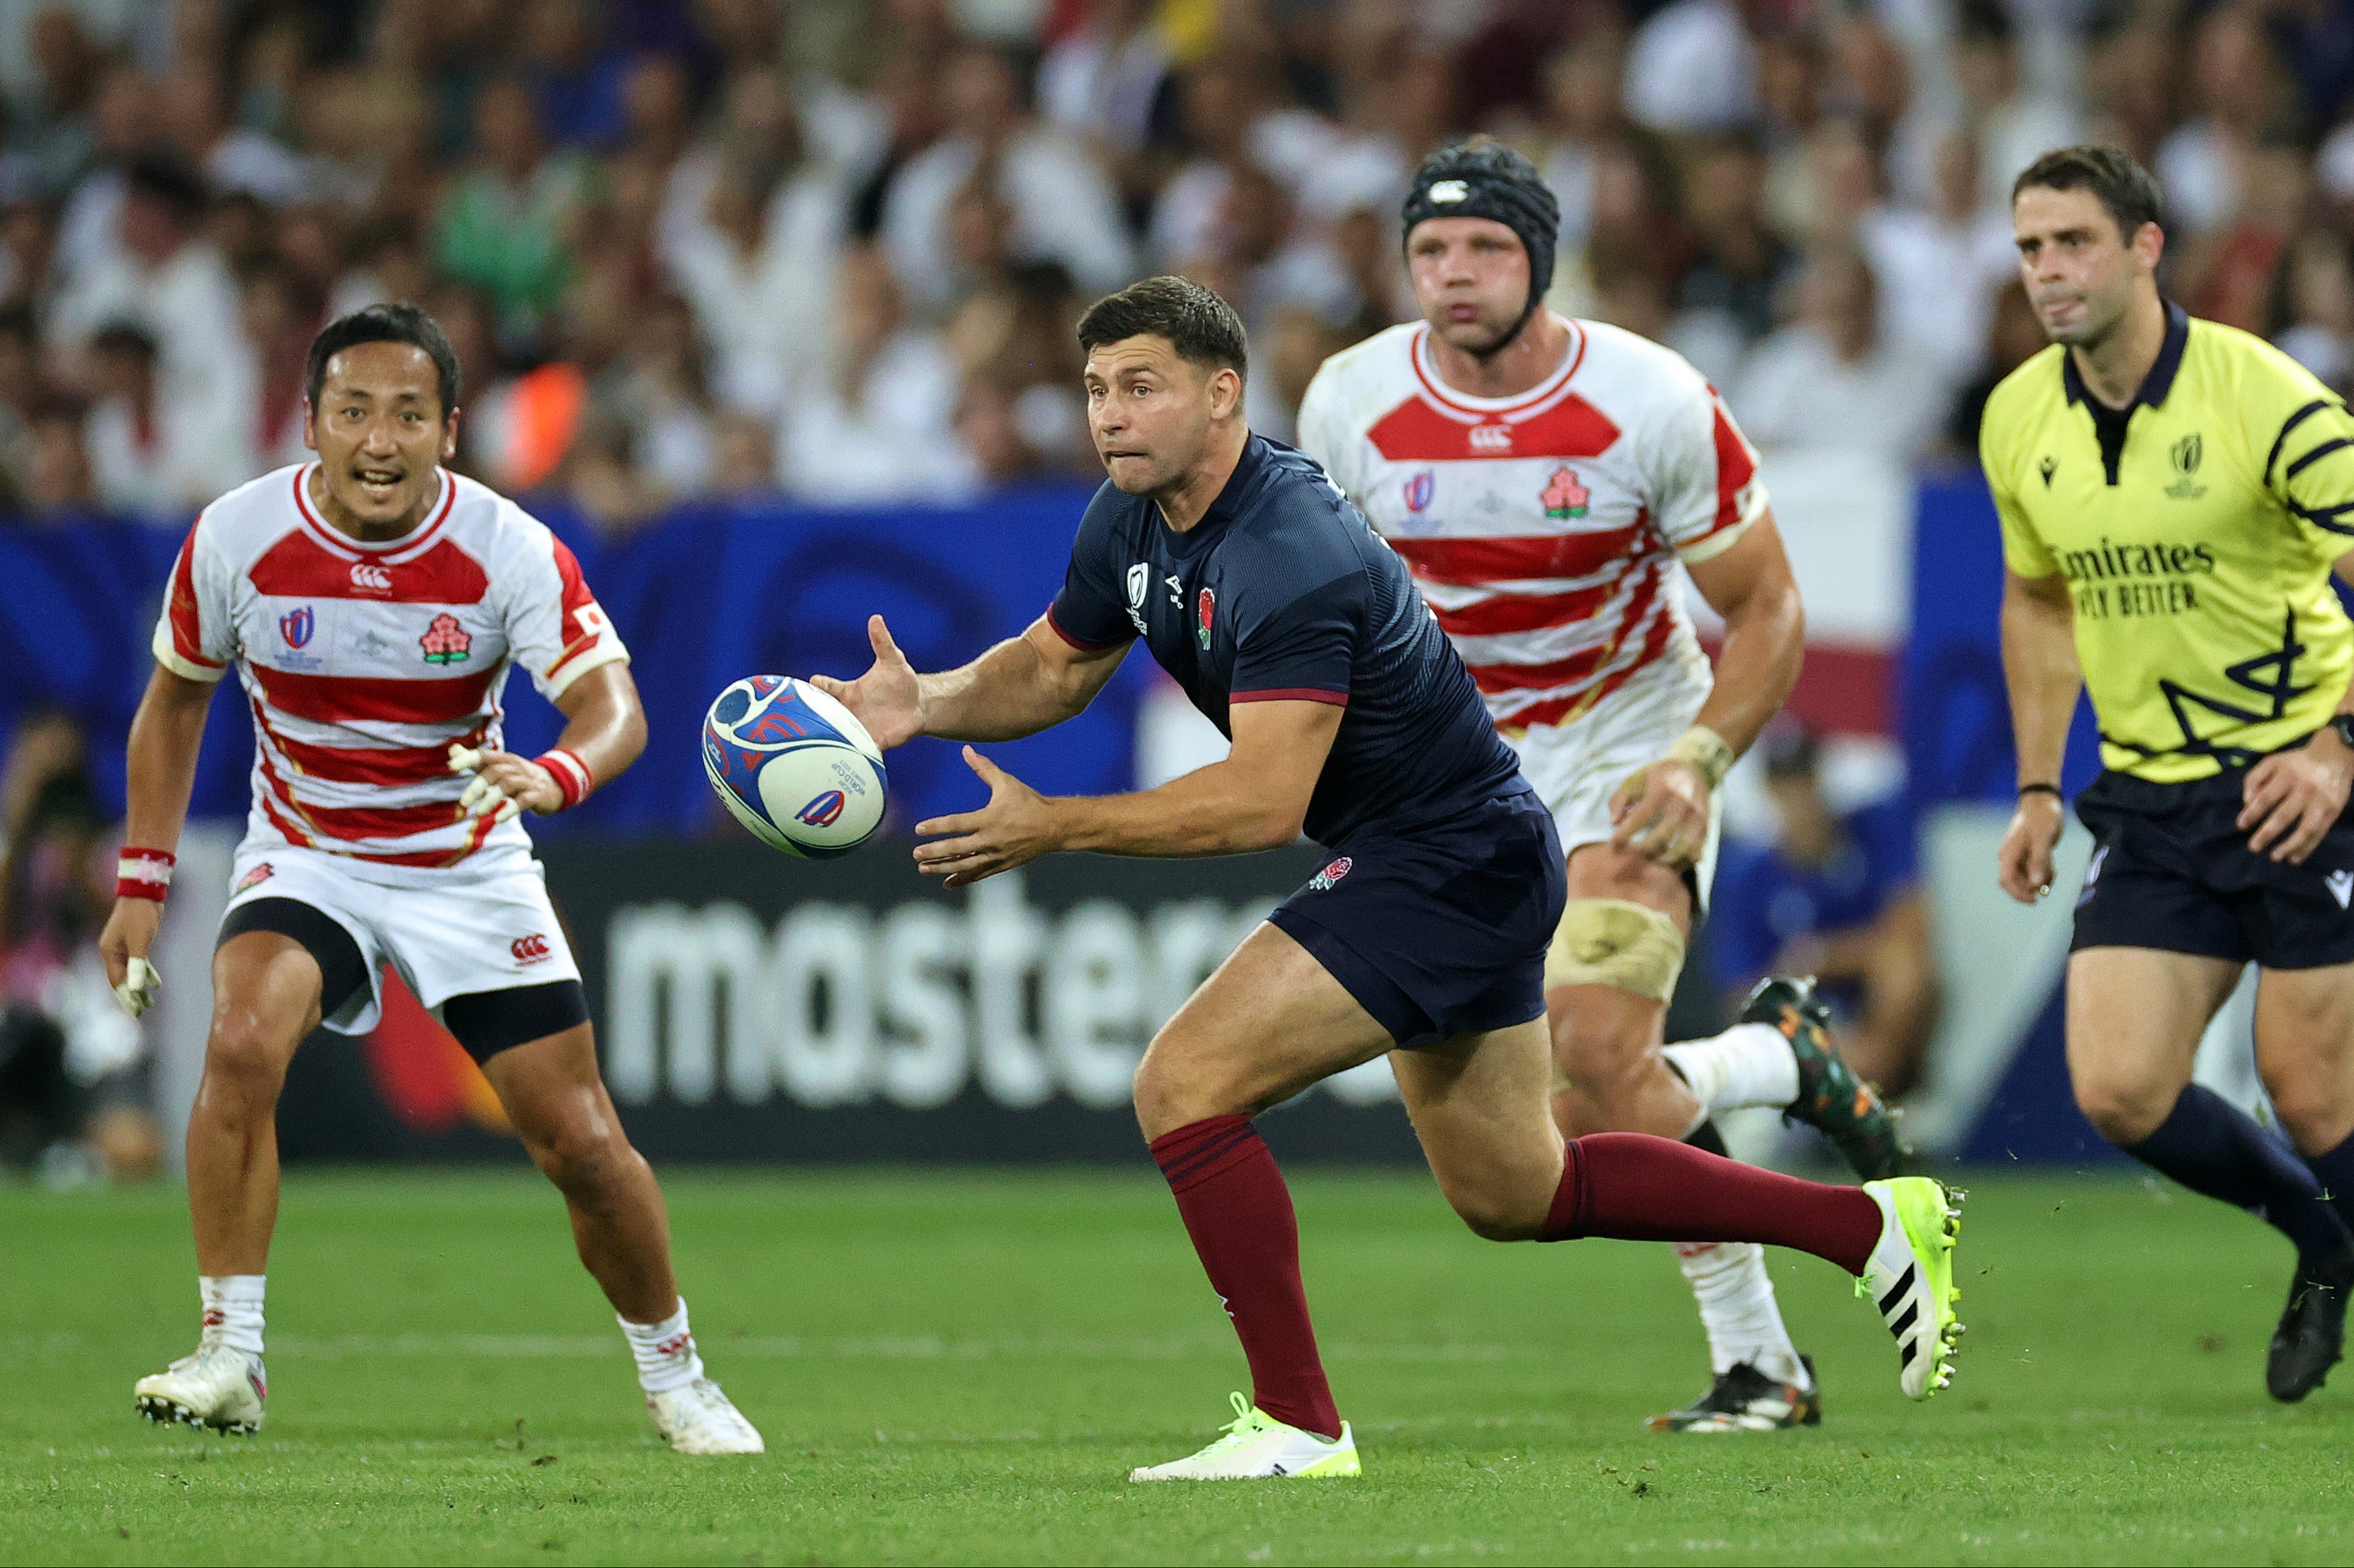 Ben Youngs concluded his England career at the end of last year’s World Cup